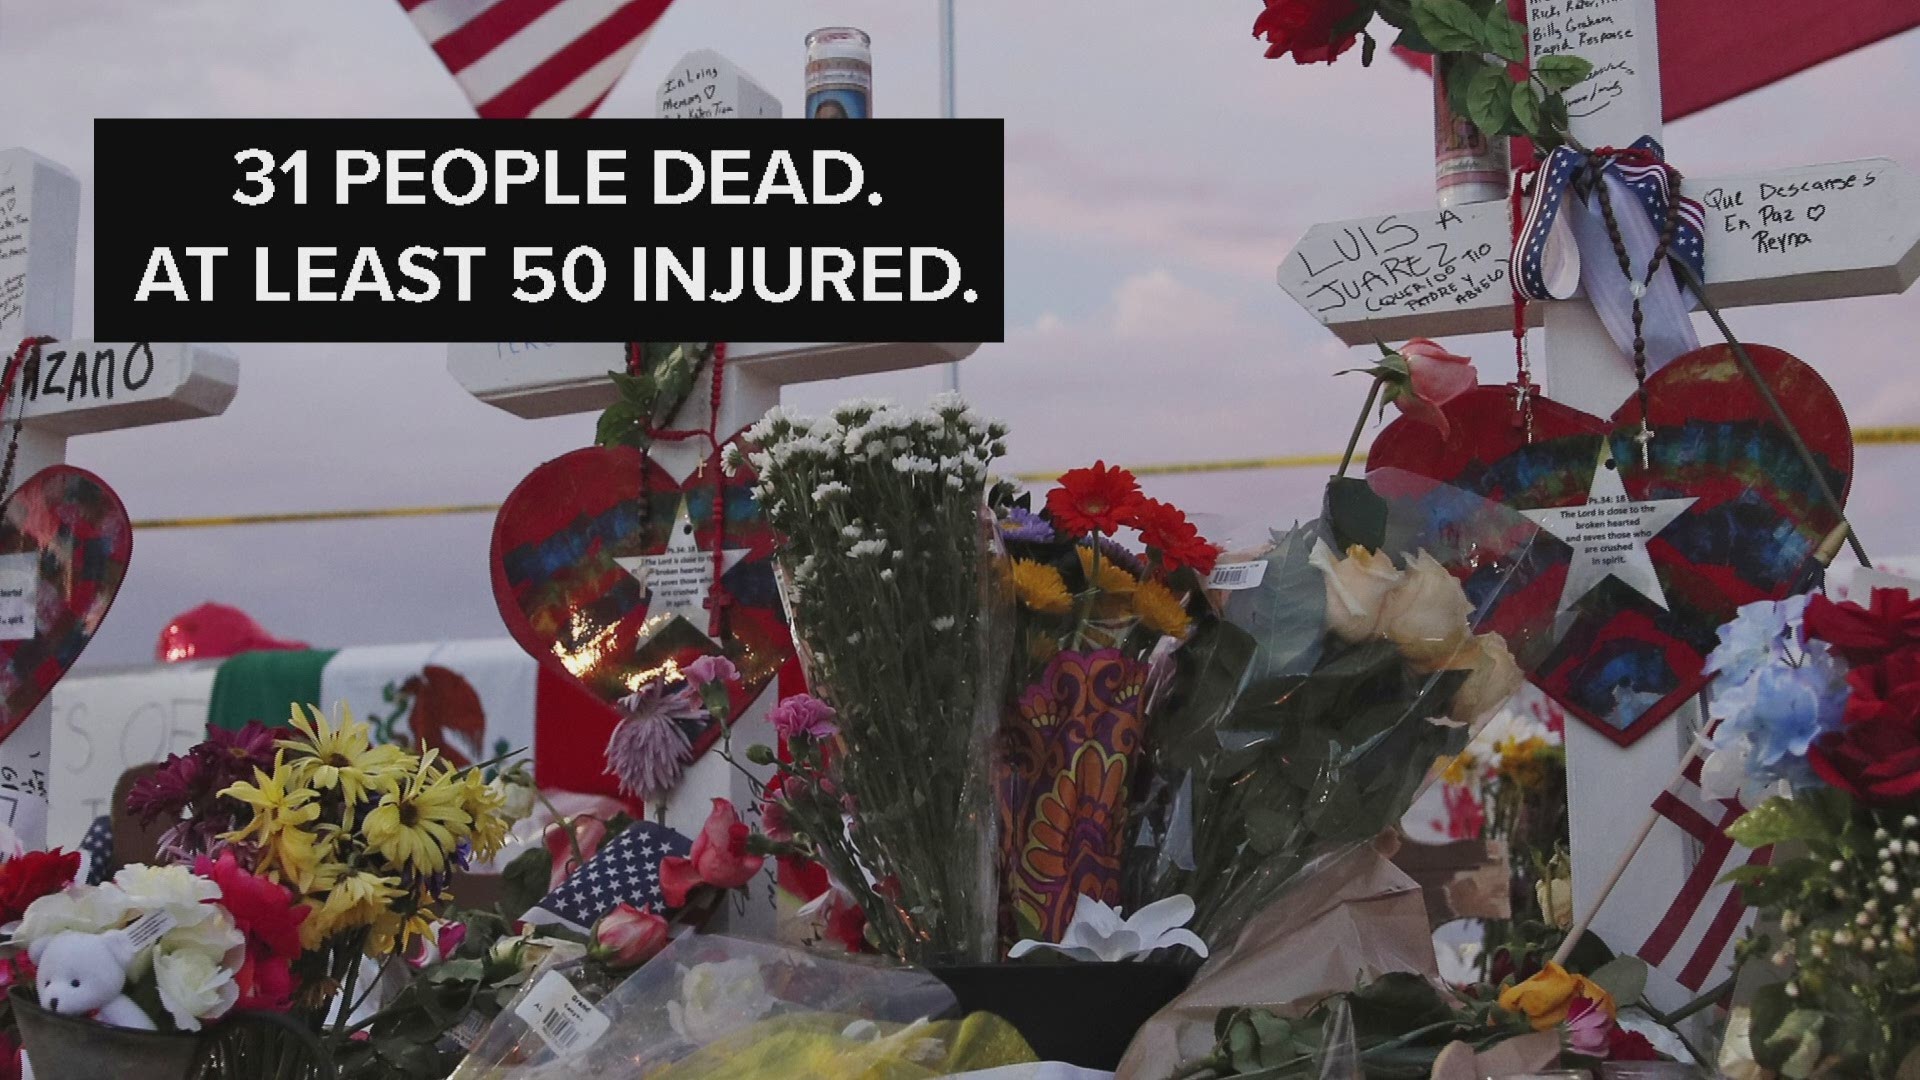 Thirty-one people dead, at least 50 injured: Twelve hours apart, these are the staggering numbers of victims involved in the recent mass shootings in El Paso and Dayton.